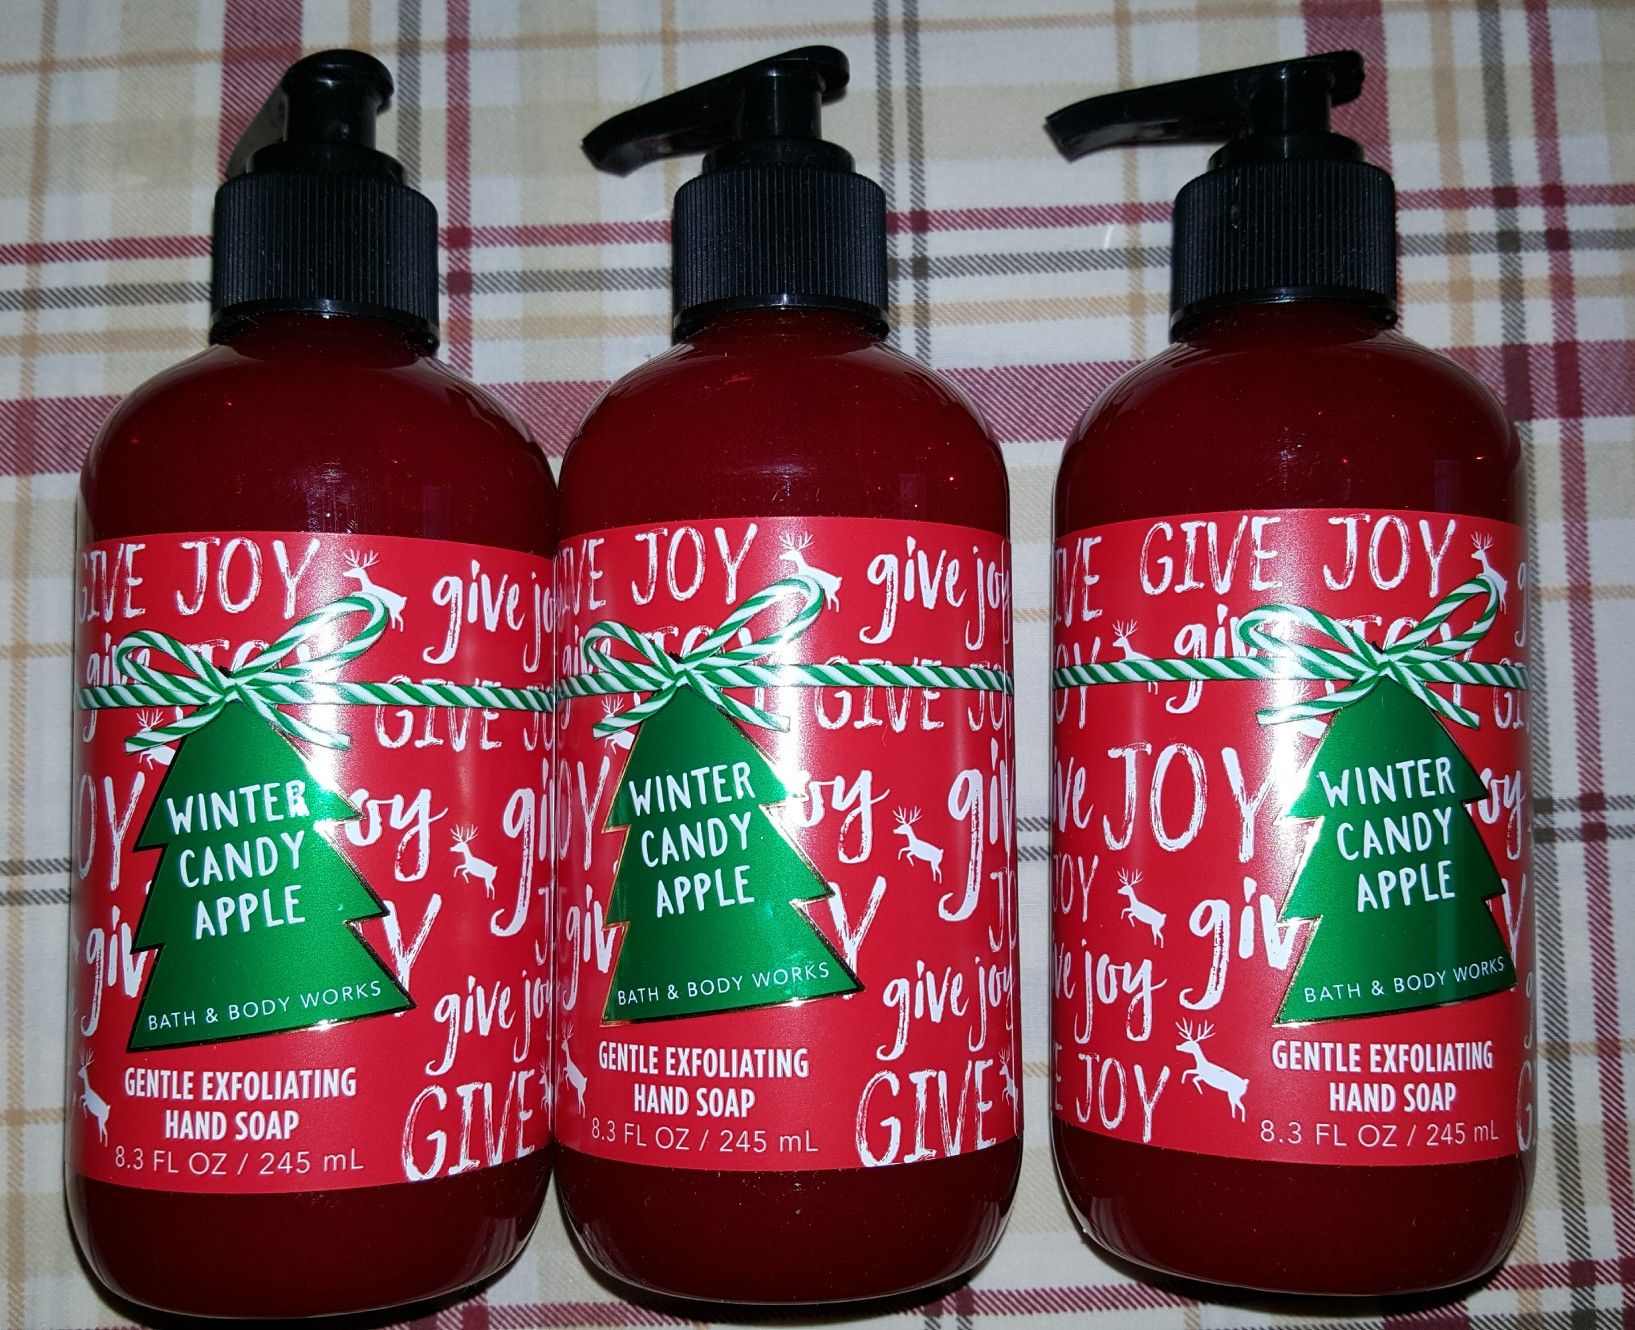 Winter candy apple hand soaps